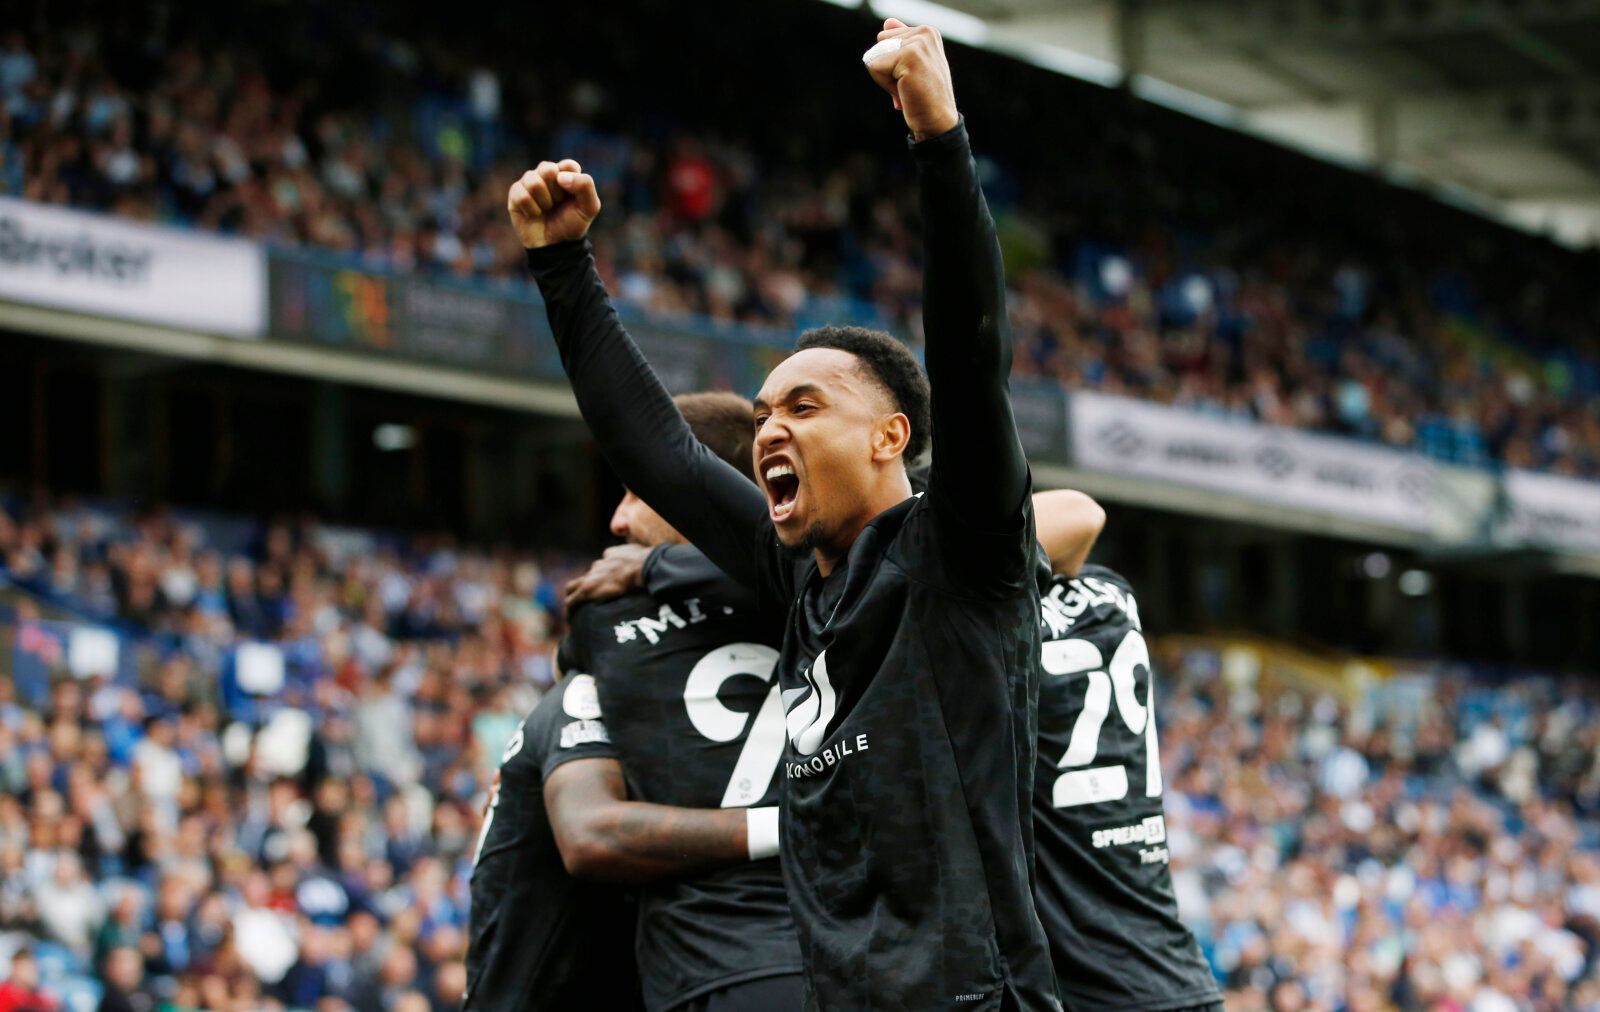 Soccer Football - Championship - Huddersfield Town v Fulham - John Smith's Stadium, Huddersfield, Britain - August 14, 2021 Fulham's Kenny Tete celebrates their fourth goal, scored by Ivan Cavaleiro Action Images/Craig Brough EDITORIAL USE ONLY. No use with unauthorized audio, video, data, fixture lists, club/league logos or 'live' services. Online in-match use limited to 75 images, no video emulation. No use in betting, games or single club /league/player publications.  Please contact your acco